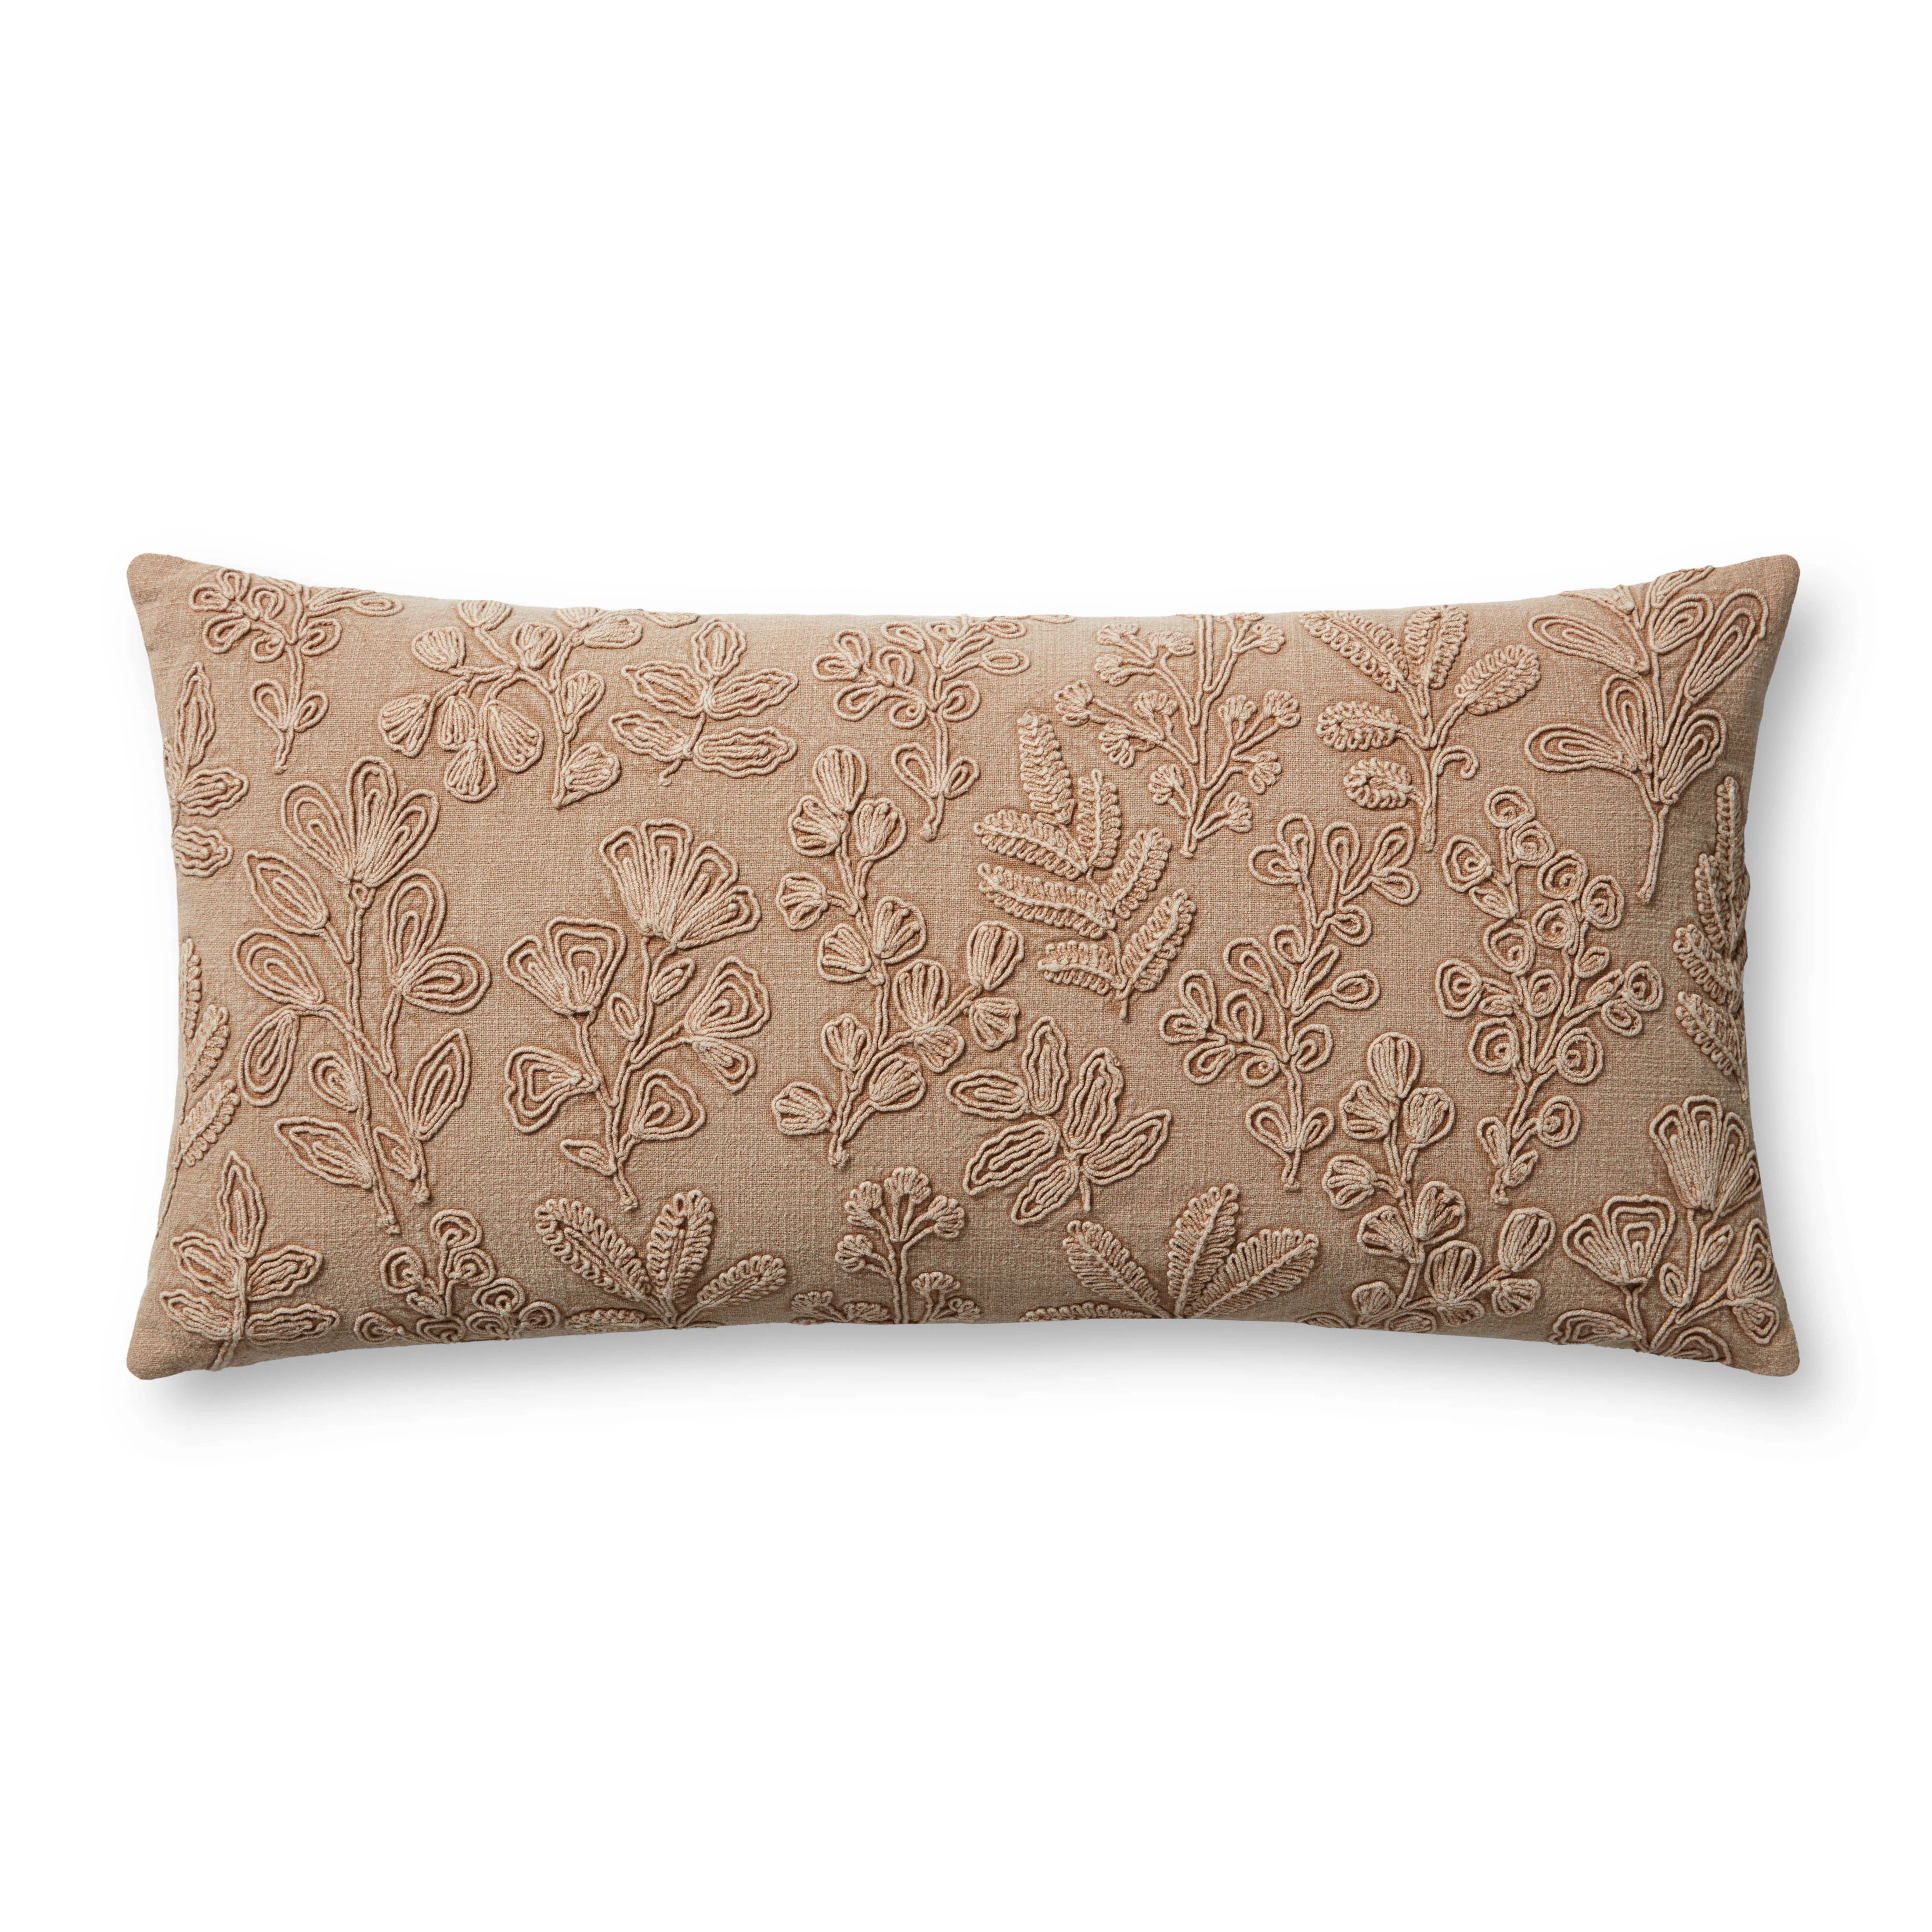 Magnolia Home by Joanna Gaines x Loloi Louise Natural Pillow | Eco Chic Home